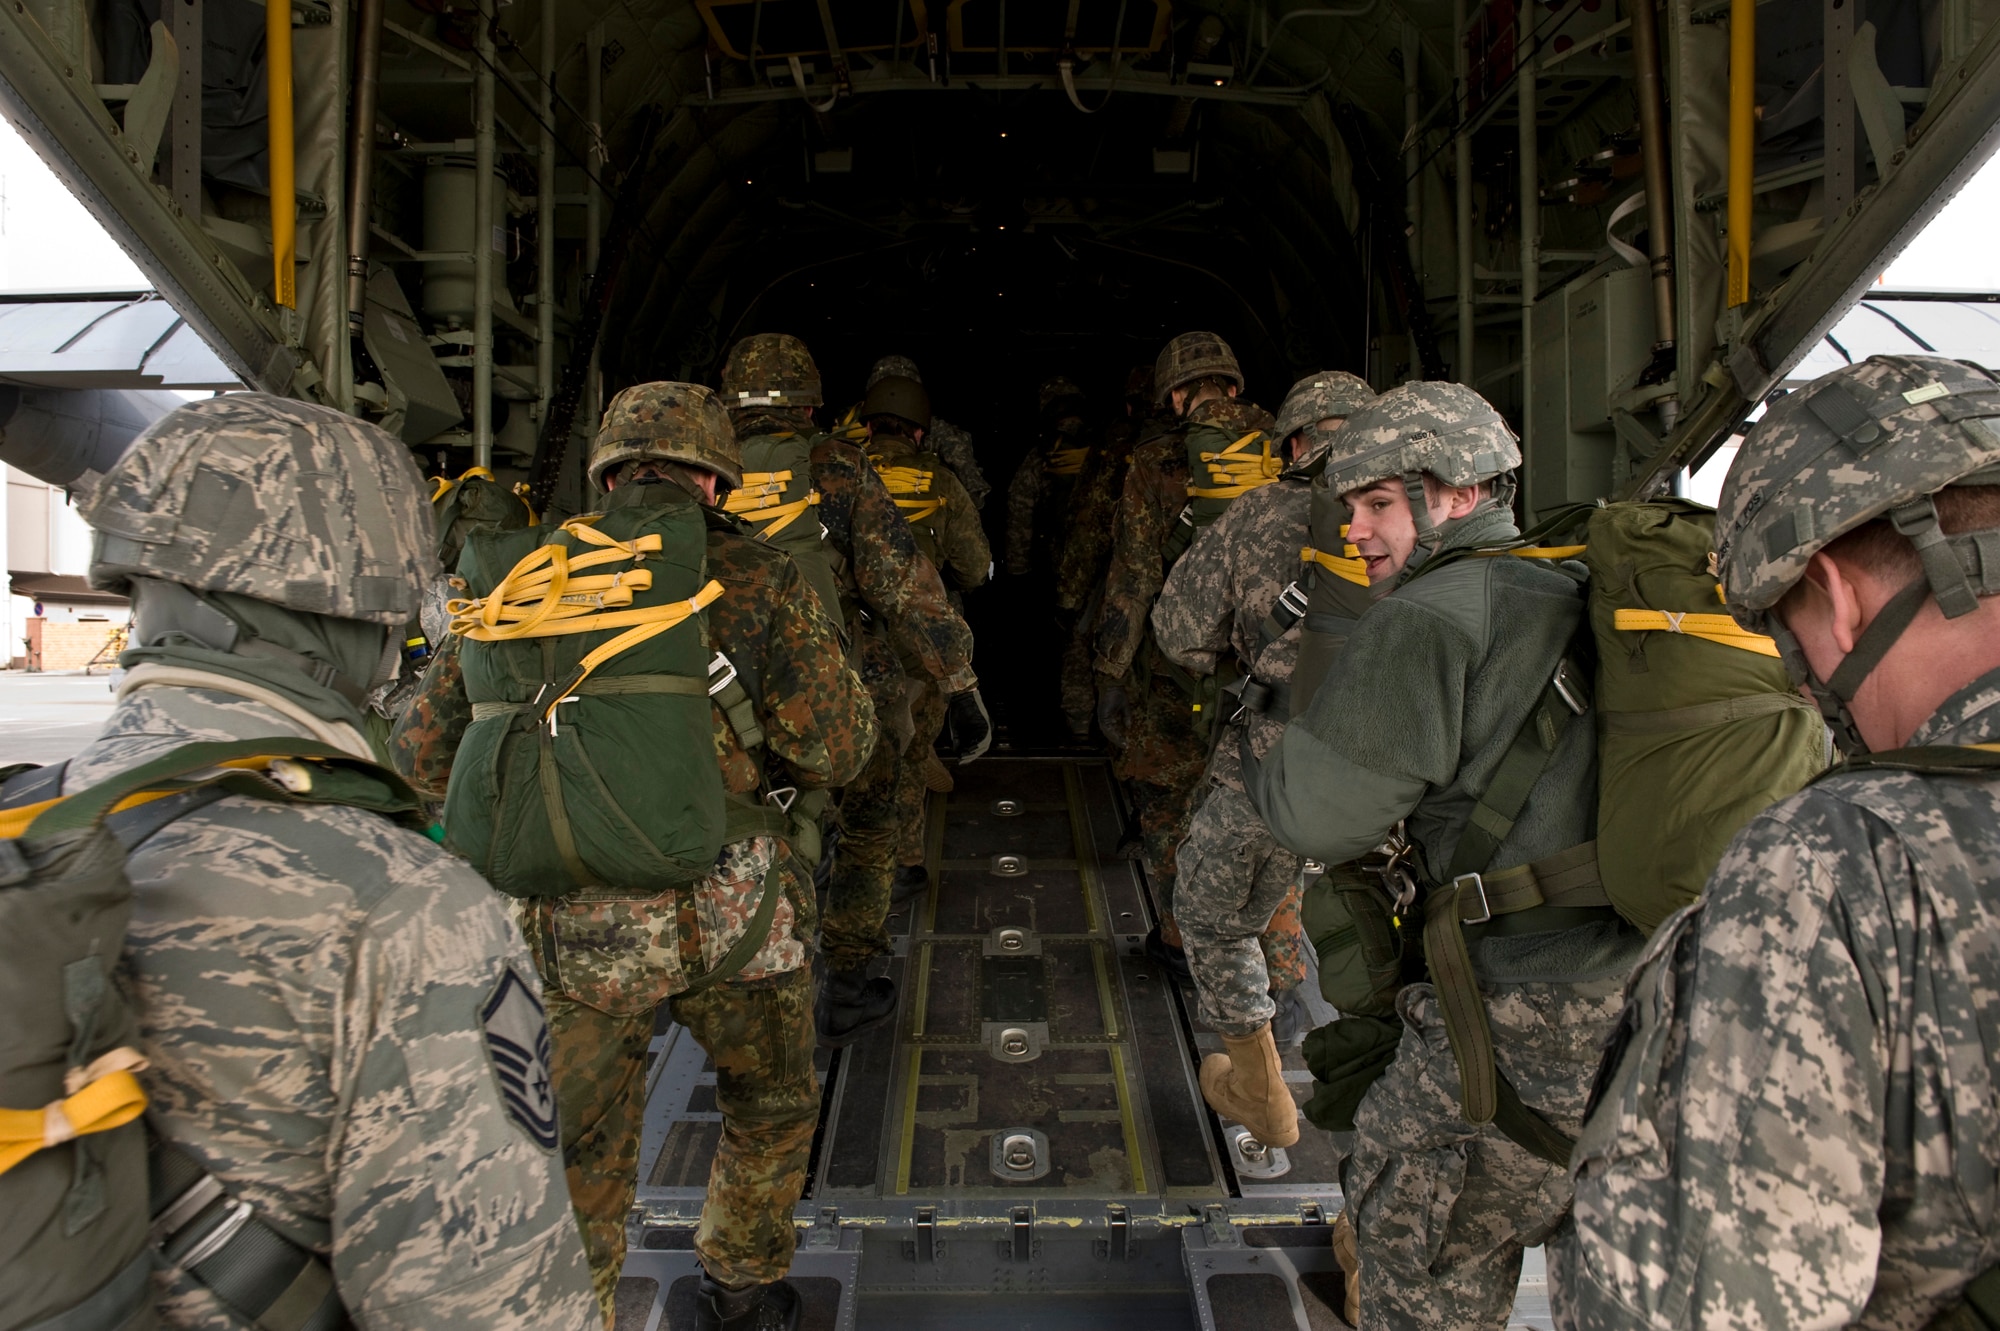 U.S. Army Soldiers, Air Force Airmen and German soldiers load into a C-130J Hercules, from Ramstein Air Base, Germany, in preparation for a training airdrop over drop zone Marnheim, Germany, Feb. 10, 2011. The single C-130J aircraft from the 37th Airlift Squadron, 86th Airlift Wing dropped more than fifty service members at the drop site.  (U.S. Air Force photo/TSgt Wayne Clark, AFNE Regional News Bureau) (Released)